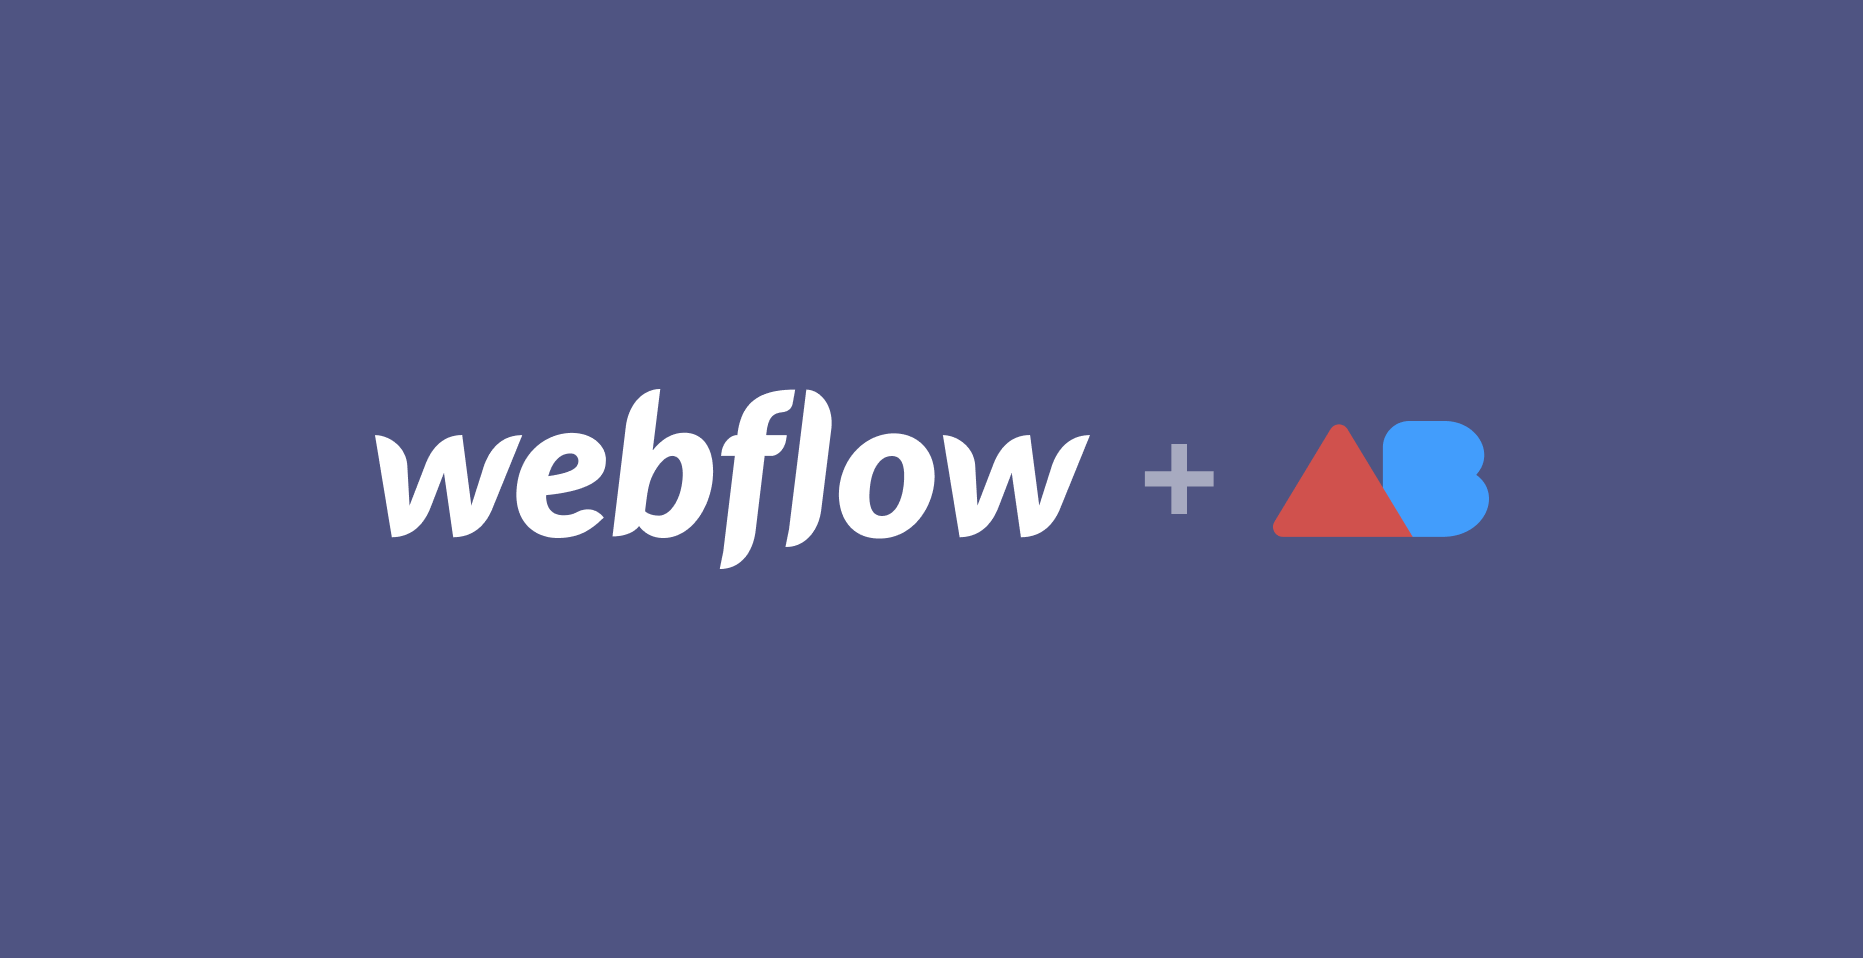 How to do A/B testing on a Webflow site